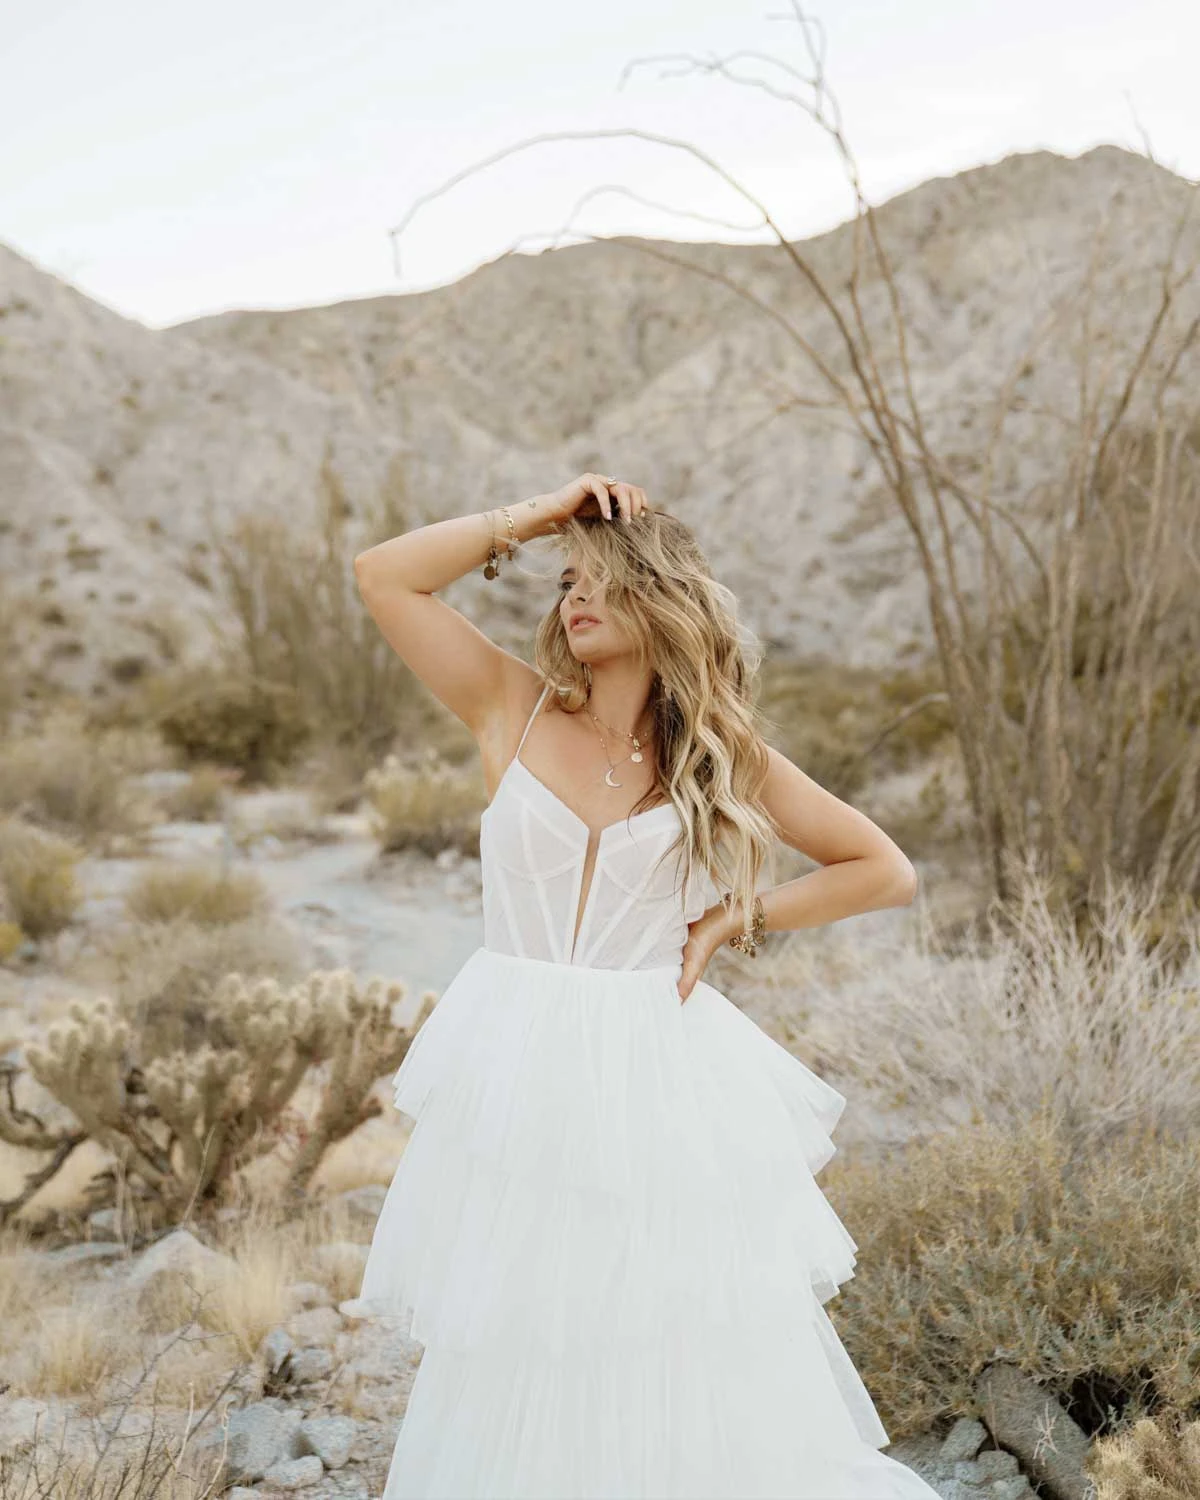 jasper Modern Boho A-Line Wedding Dress with Textured Tiered Tulle Skirt and Train  by All Who Wander